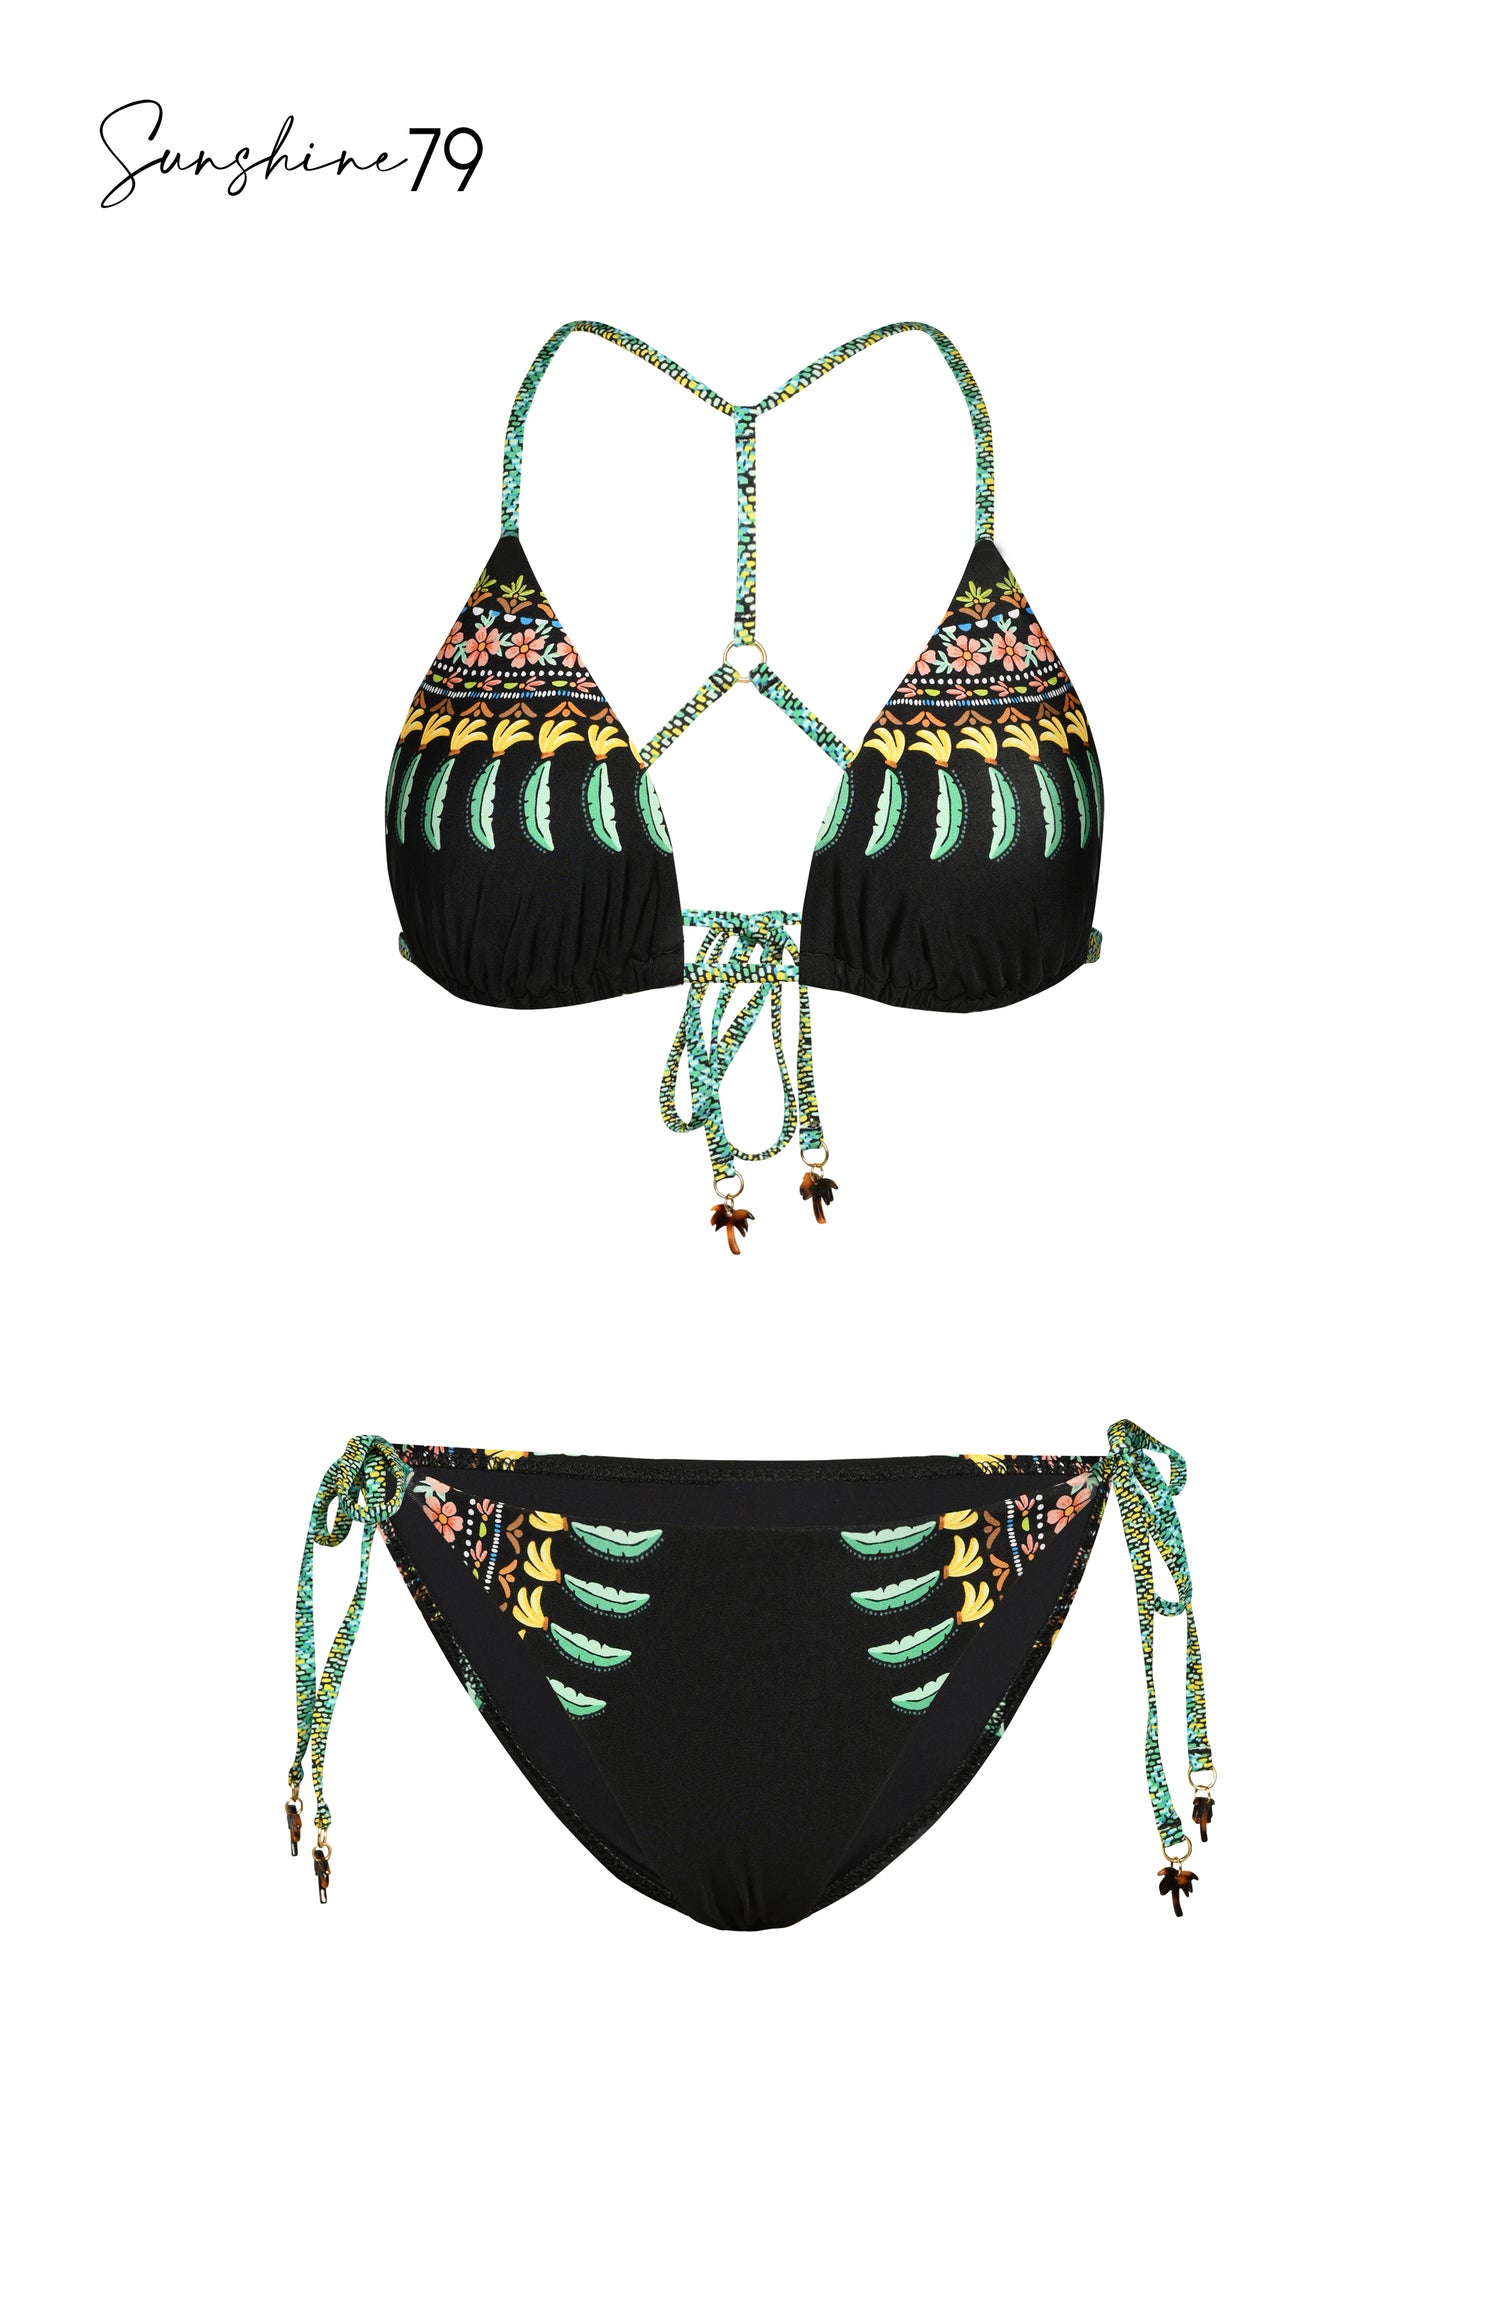 Triangle swimsuit top and matching bottoms with tropical print